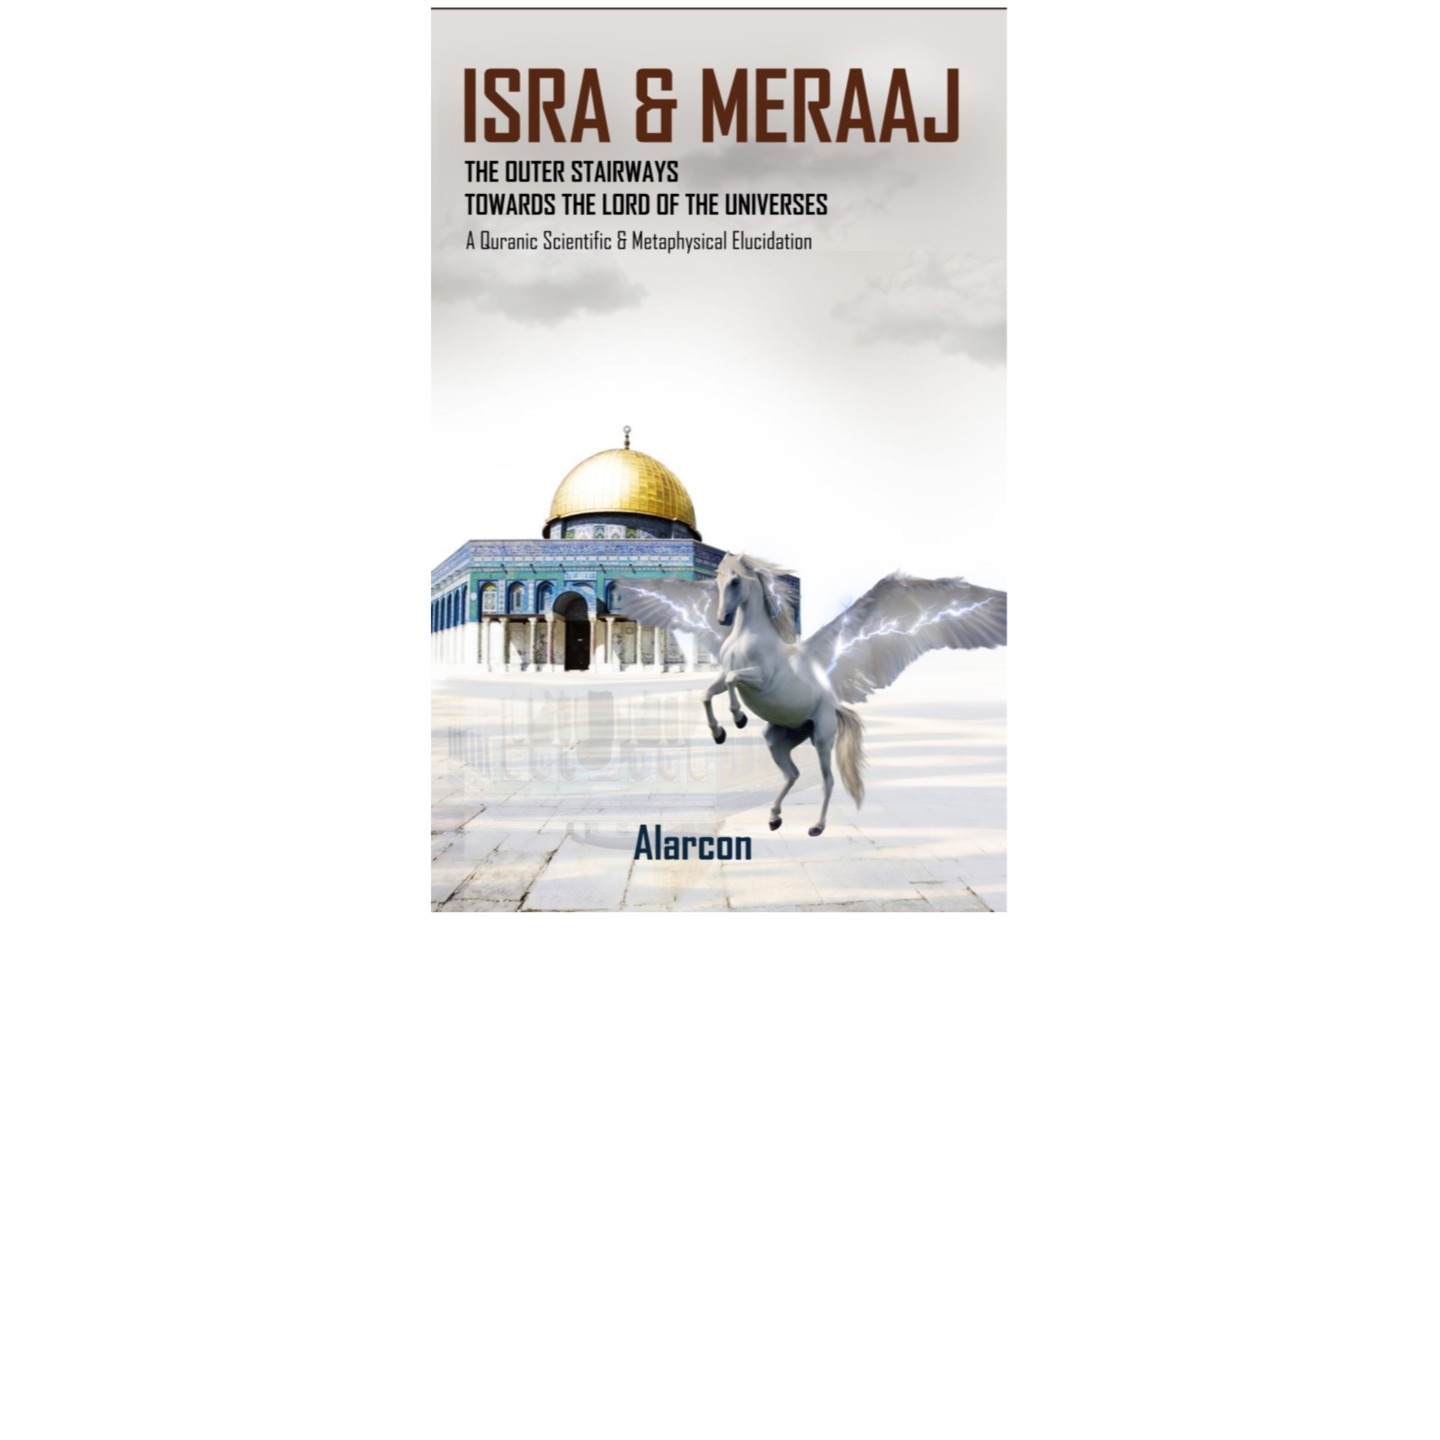 Isra & Meraaj The Outer Stairways Towards the Lord of the Universes by Alarcon